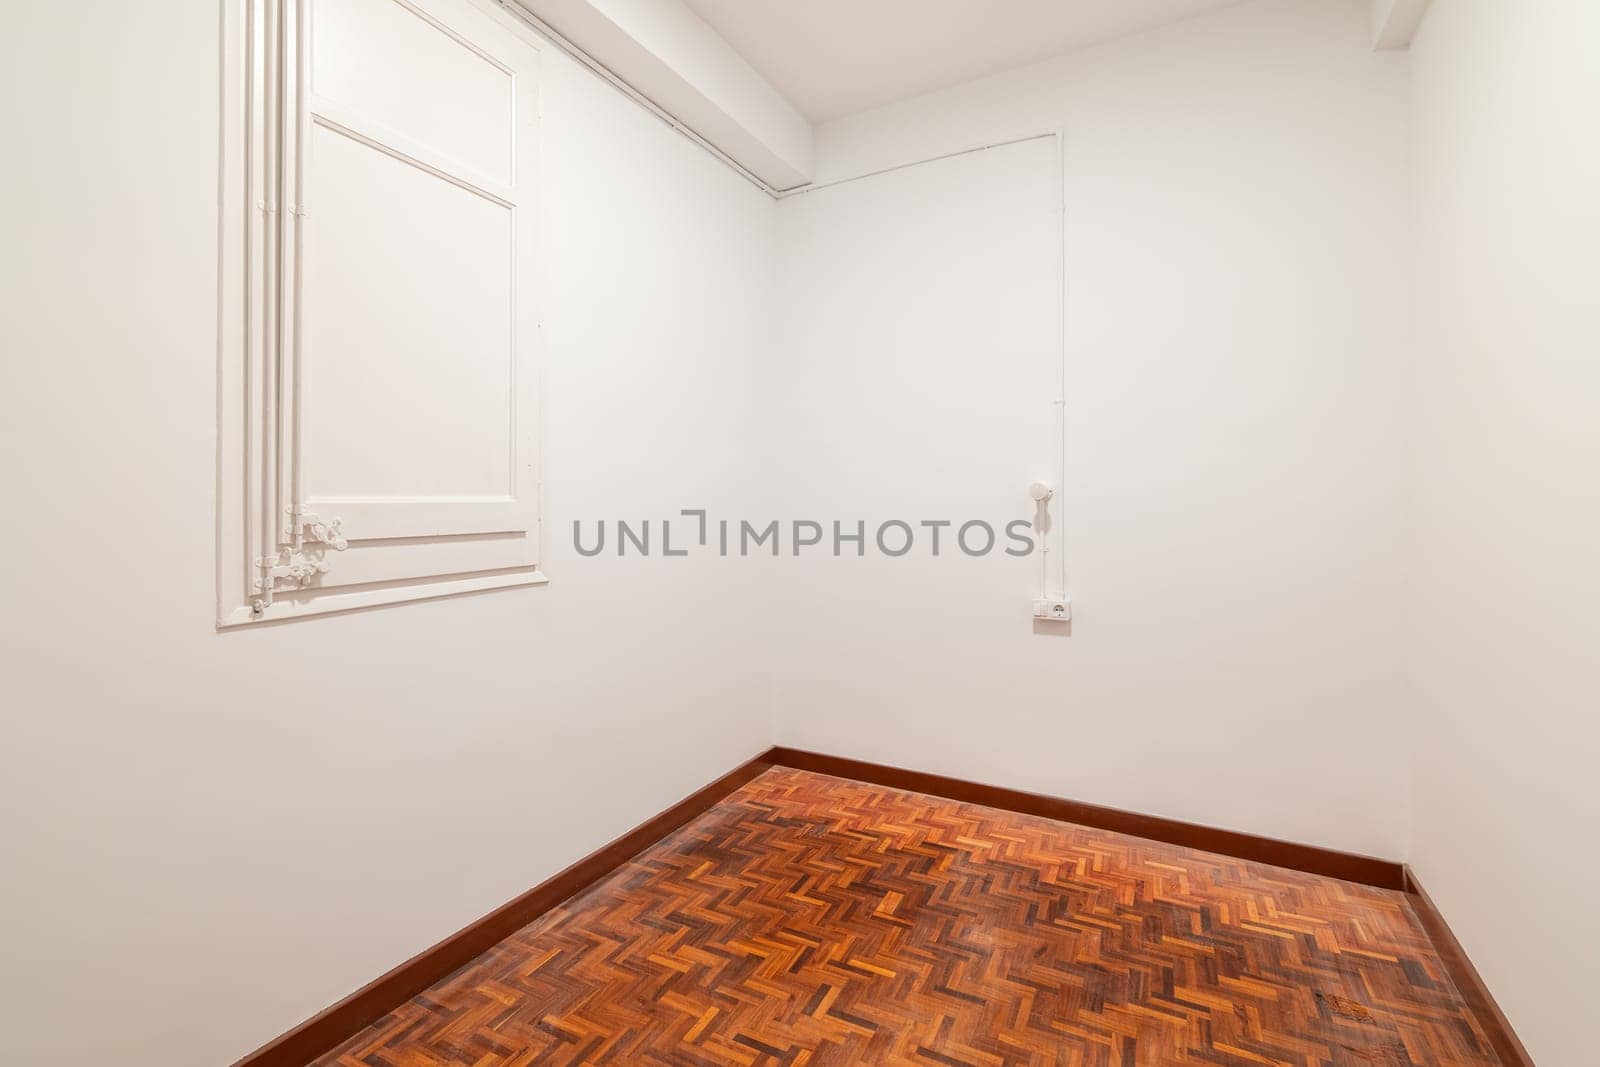 The empty room features a hardwood floor with wood stain and white painted walls, creating an artful space with a simple yet elegant aesthetic.